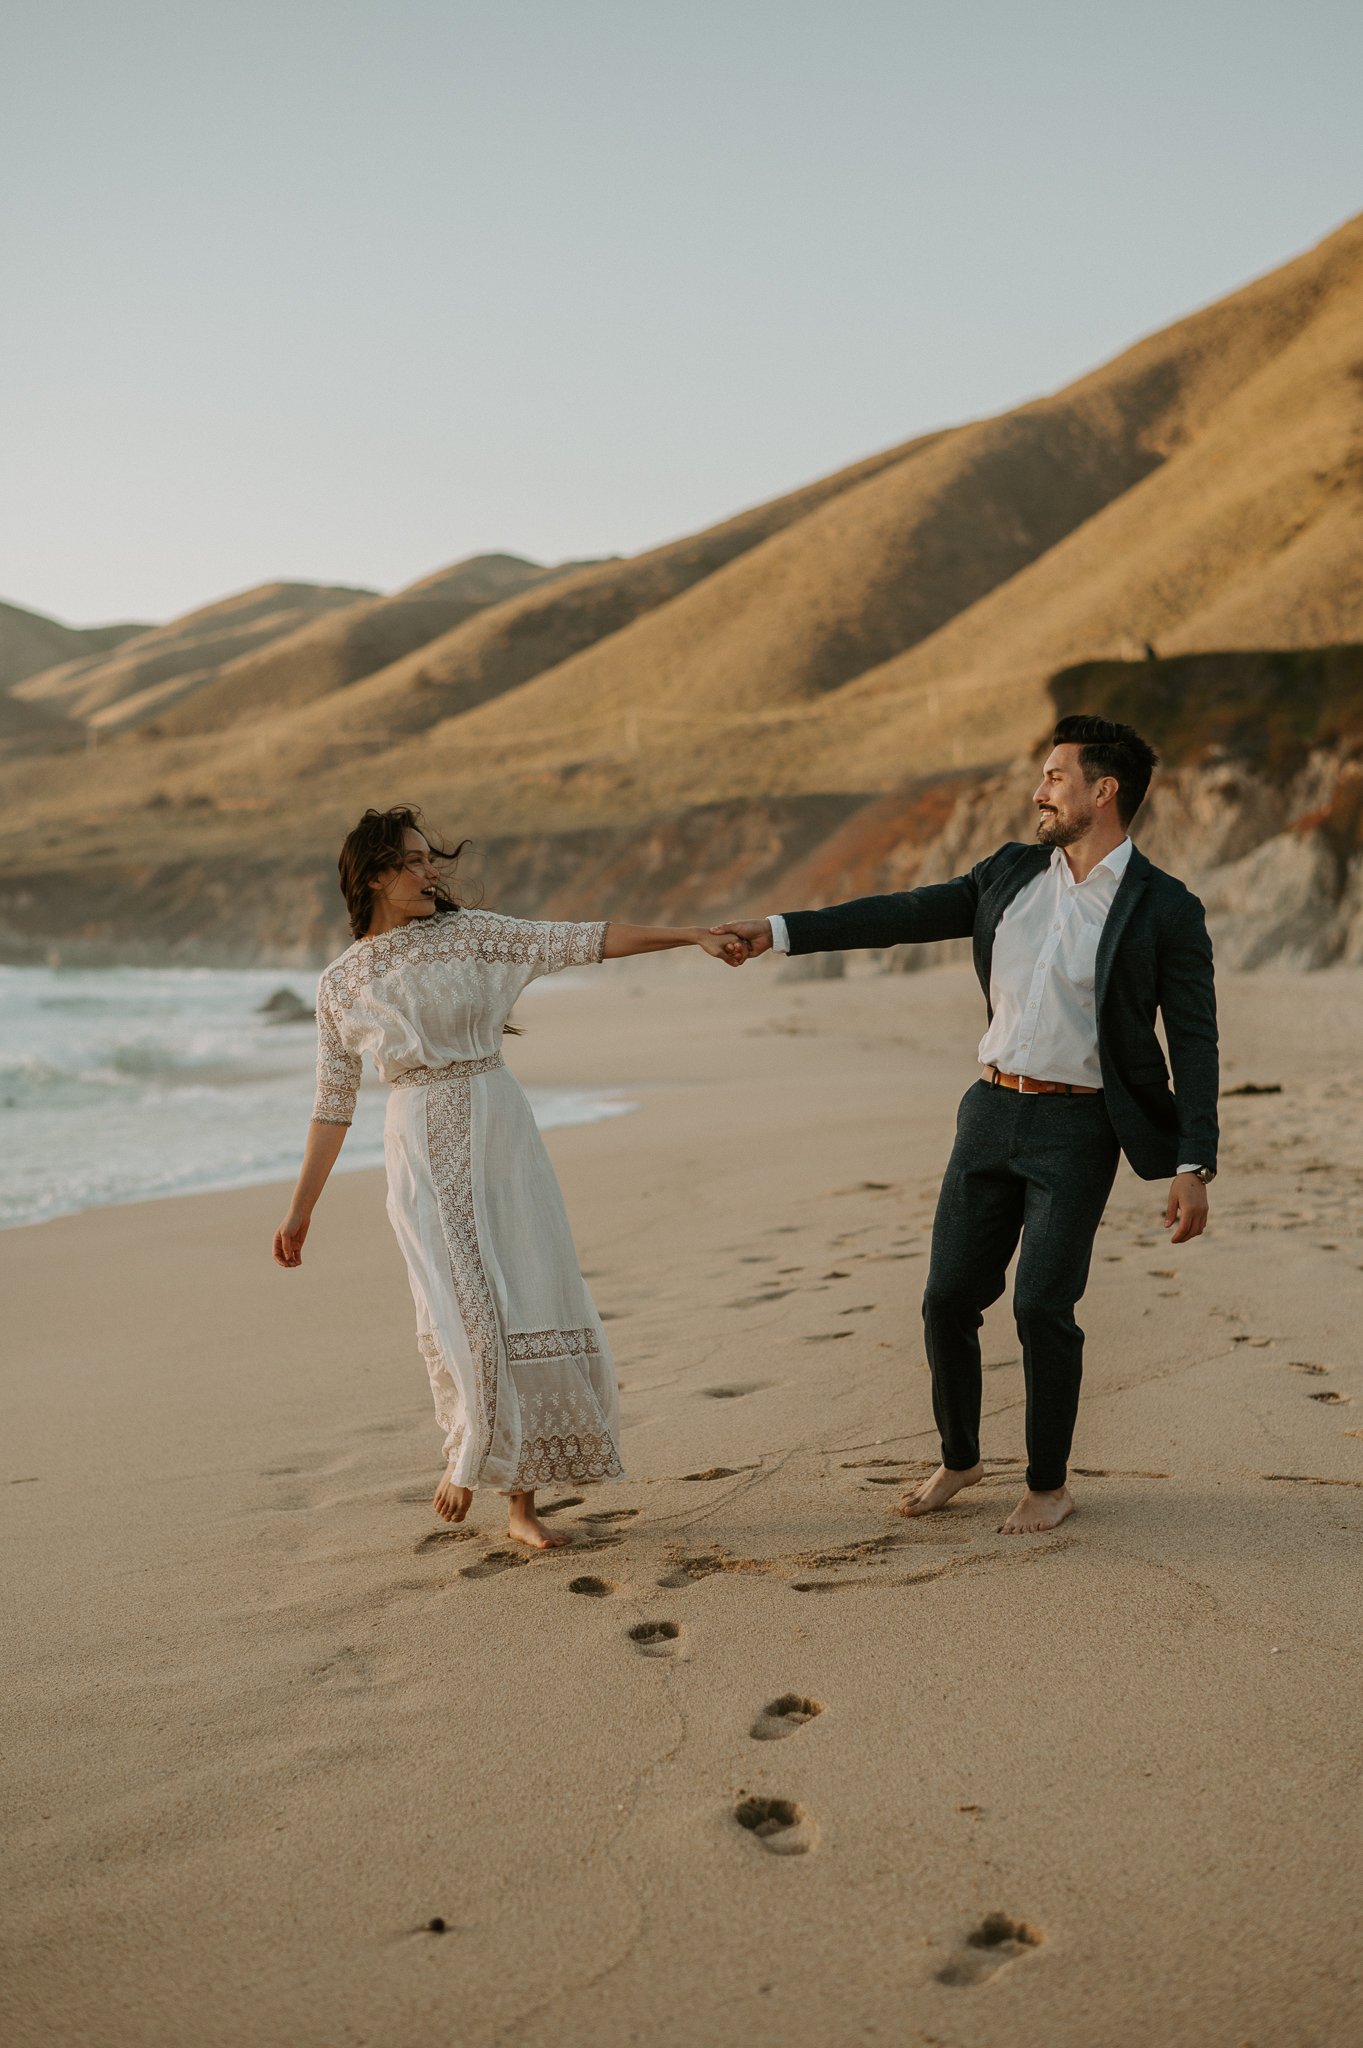 Newly engaged couple walking on beach holding hands Big Sur